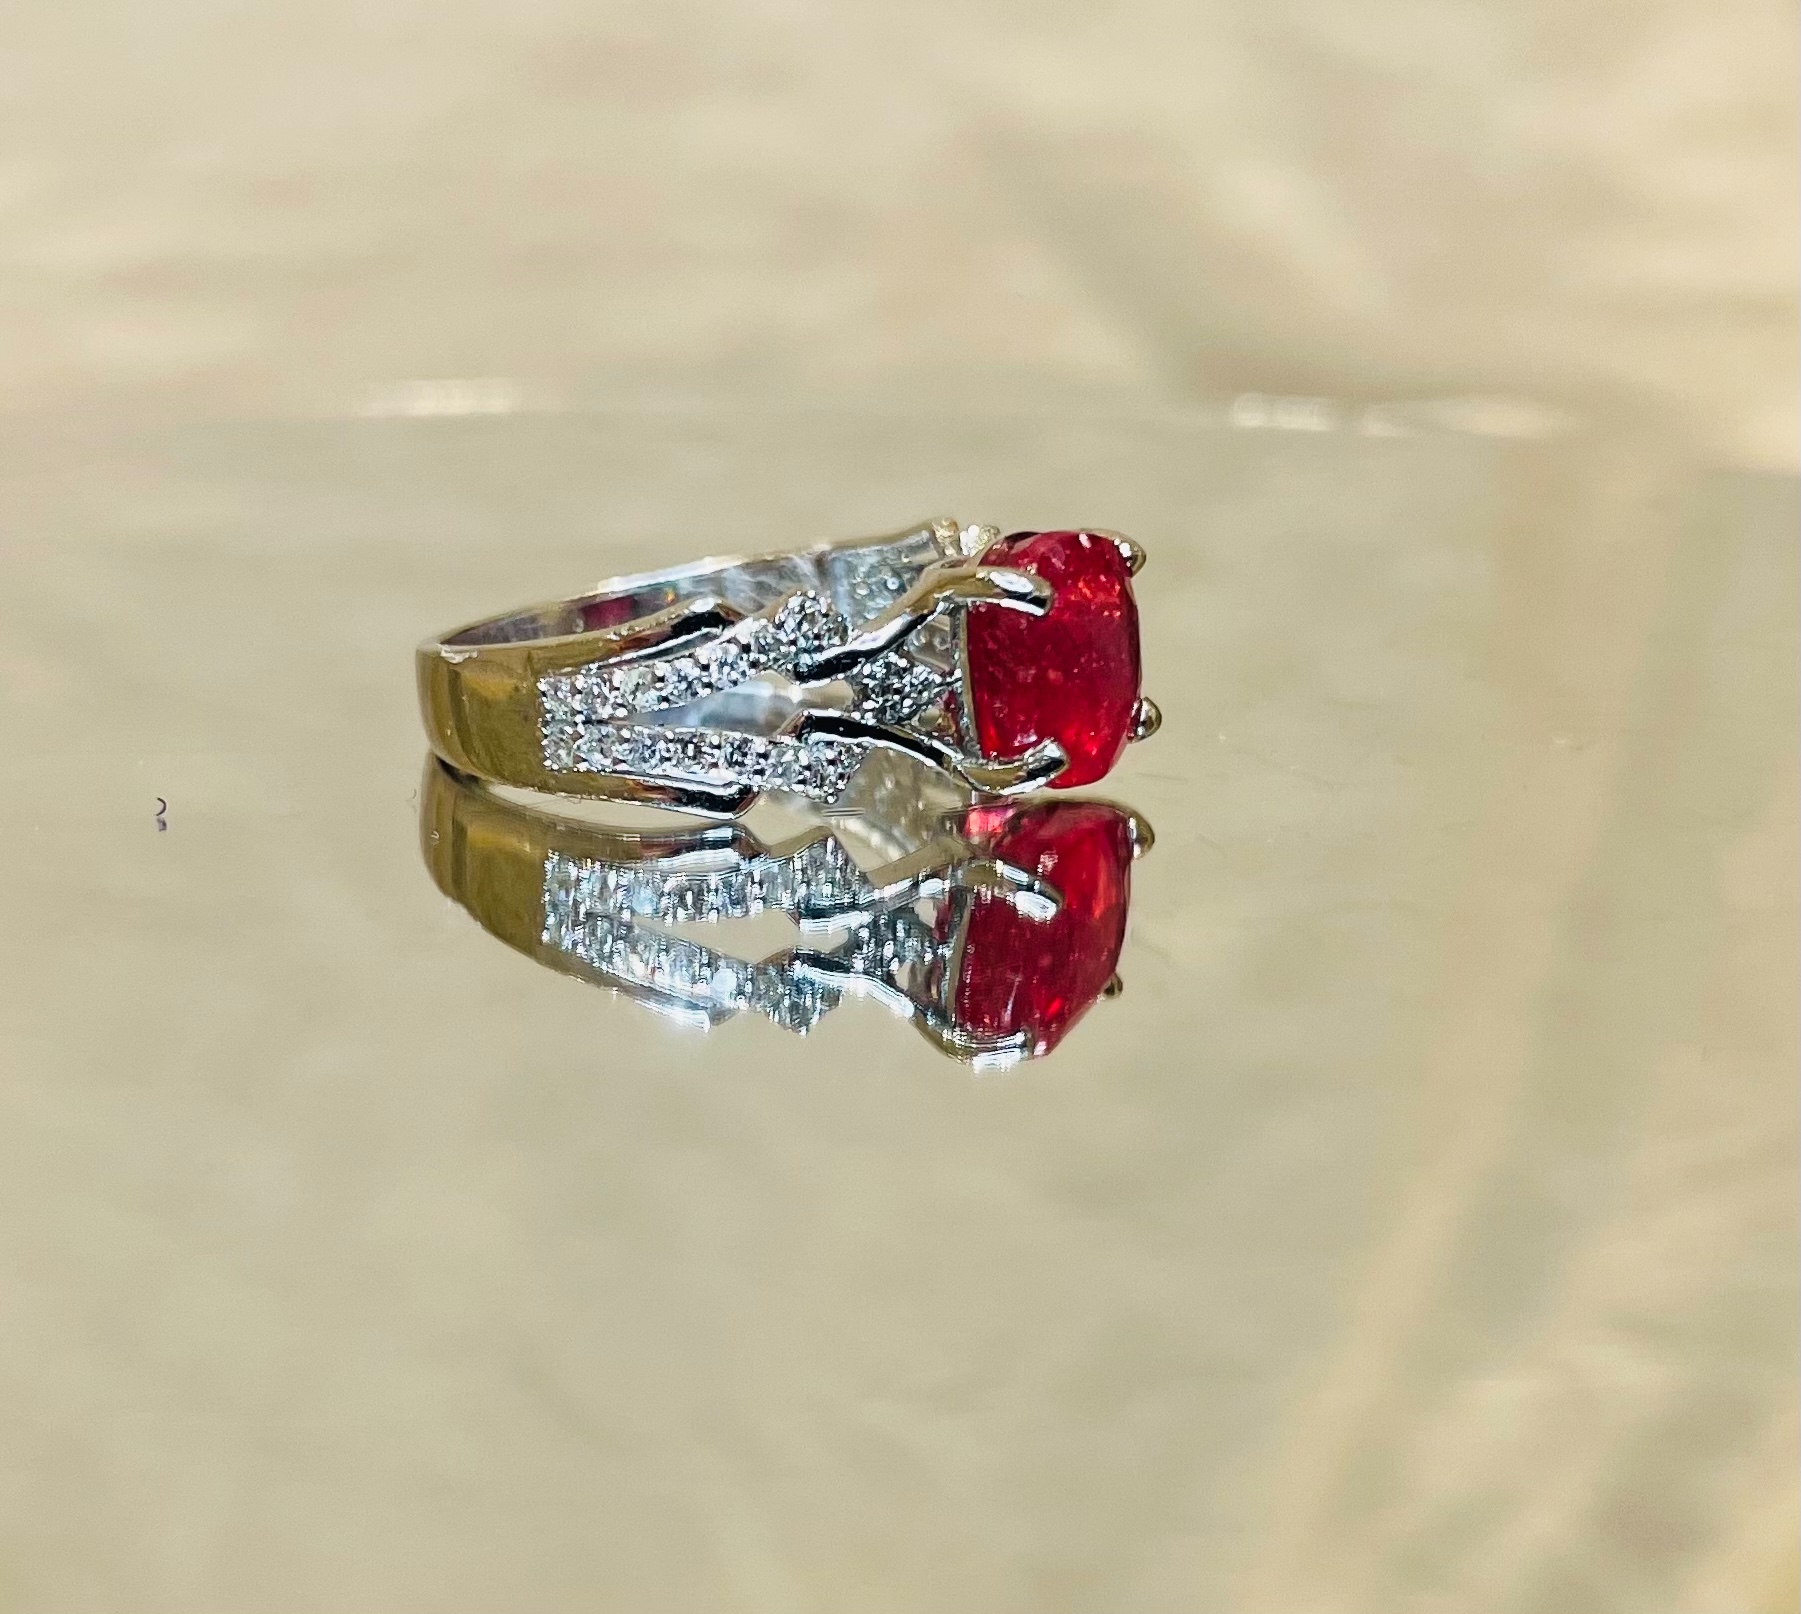 Natural Burmese Ruby Ring 3.35 Ct With Natural Diamonds & 18kGold - Image 4 of 5